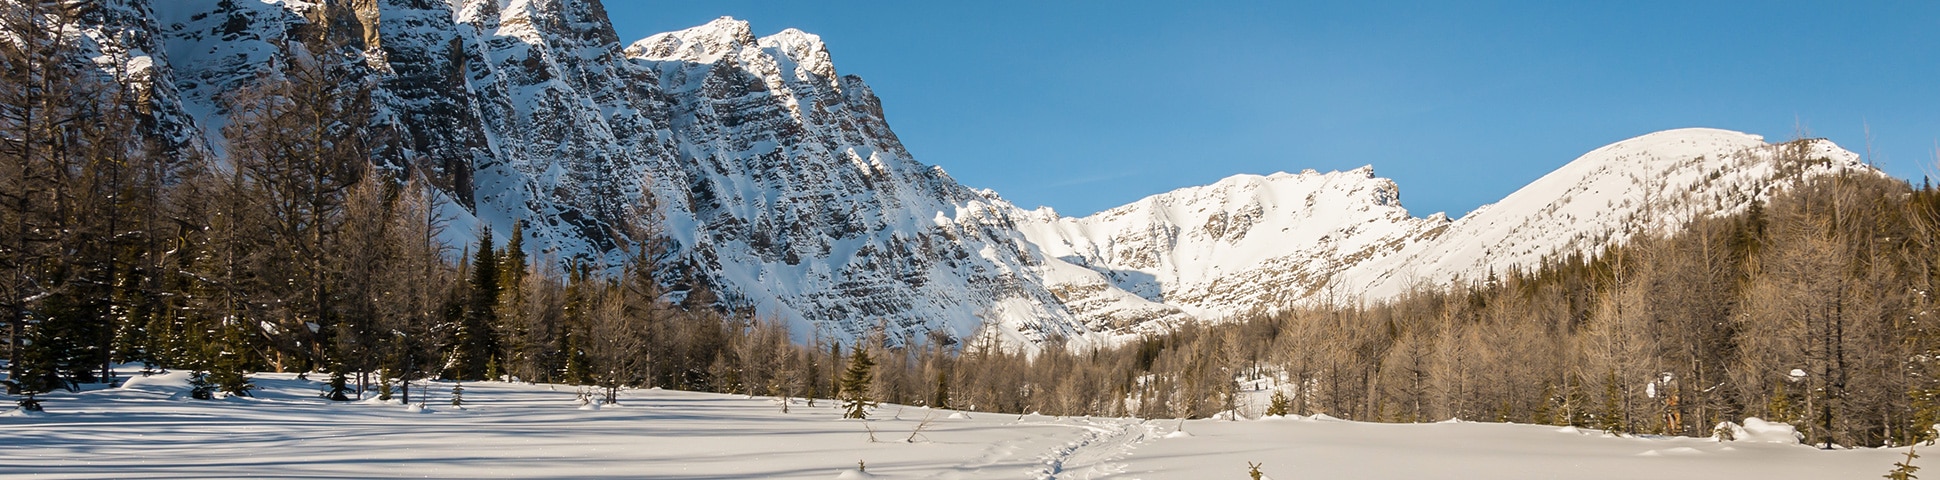 Snowshoeing in Banff National Park